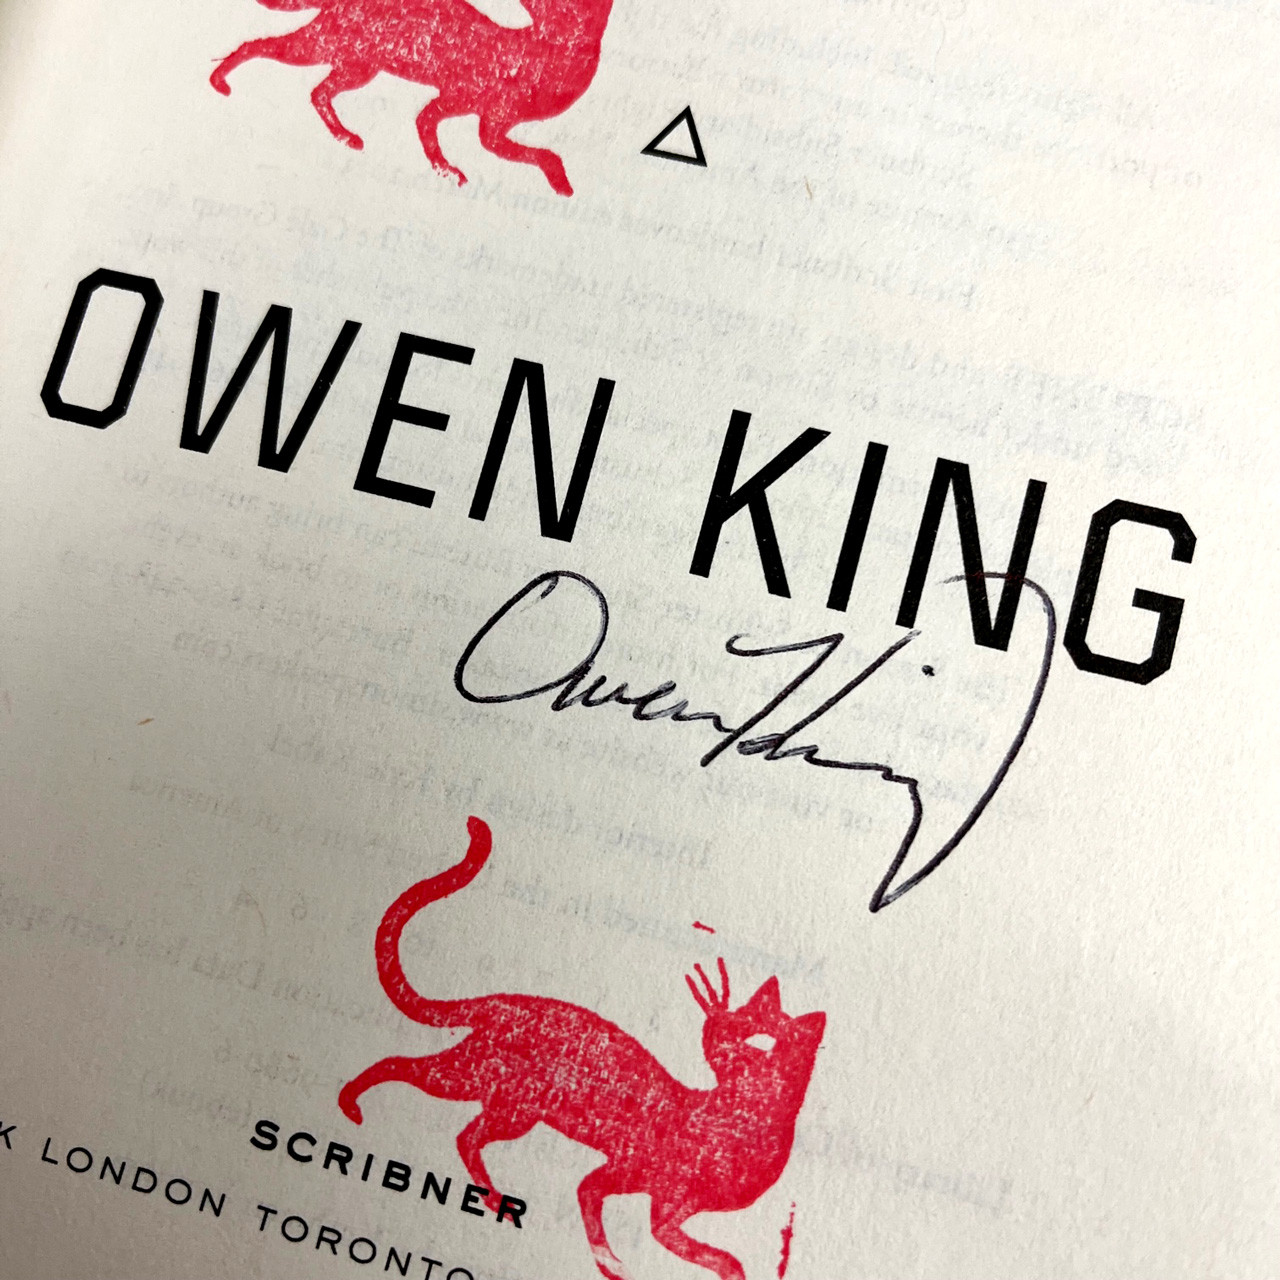 Owen King "The Curator" Signed First Edition, First Printing w/COA [Very Fine]